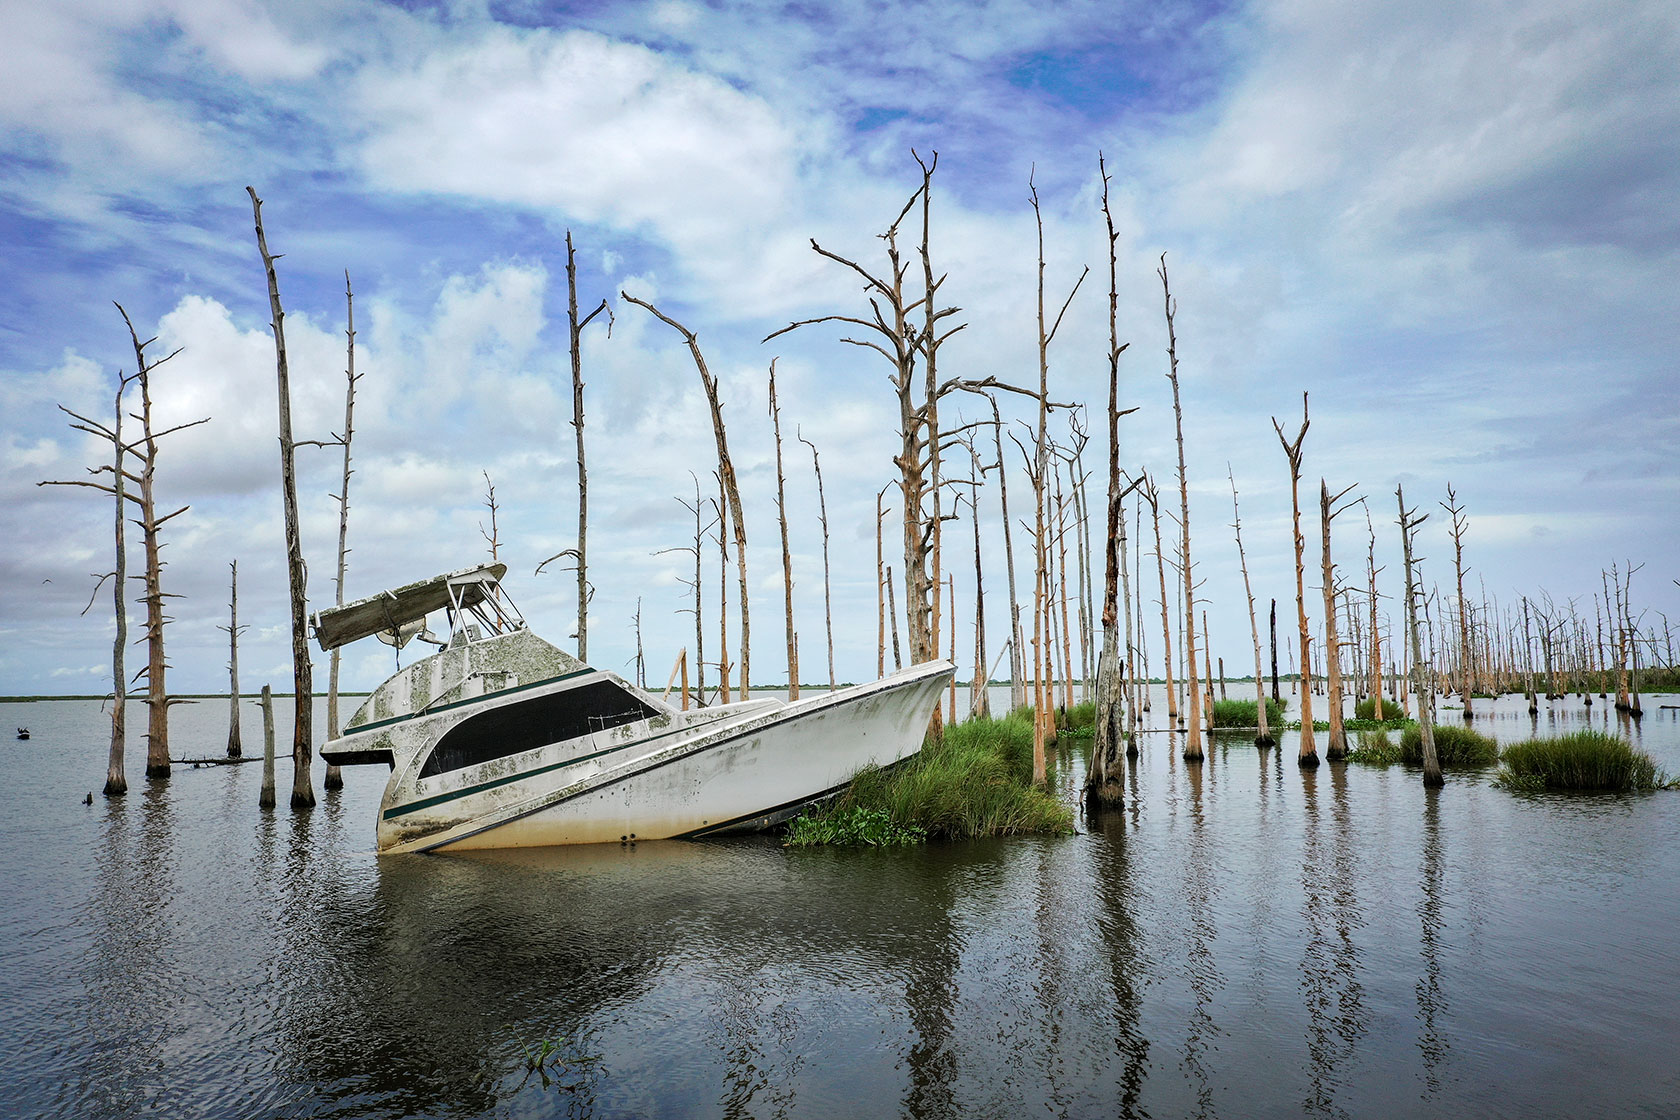 An abandoned boat sits in the water amid cypress trees